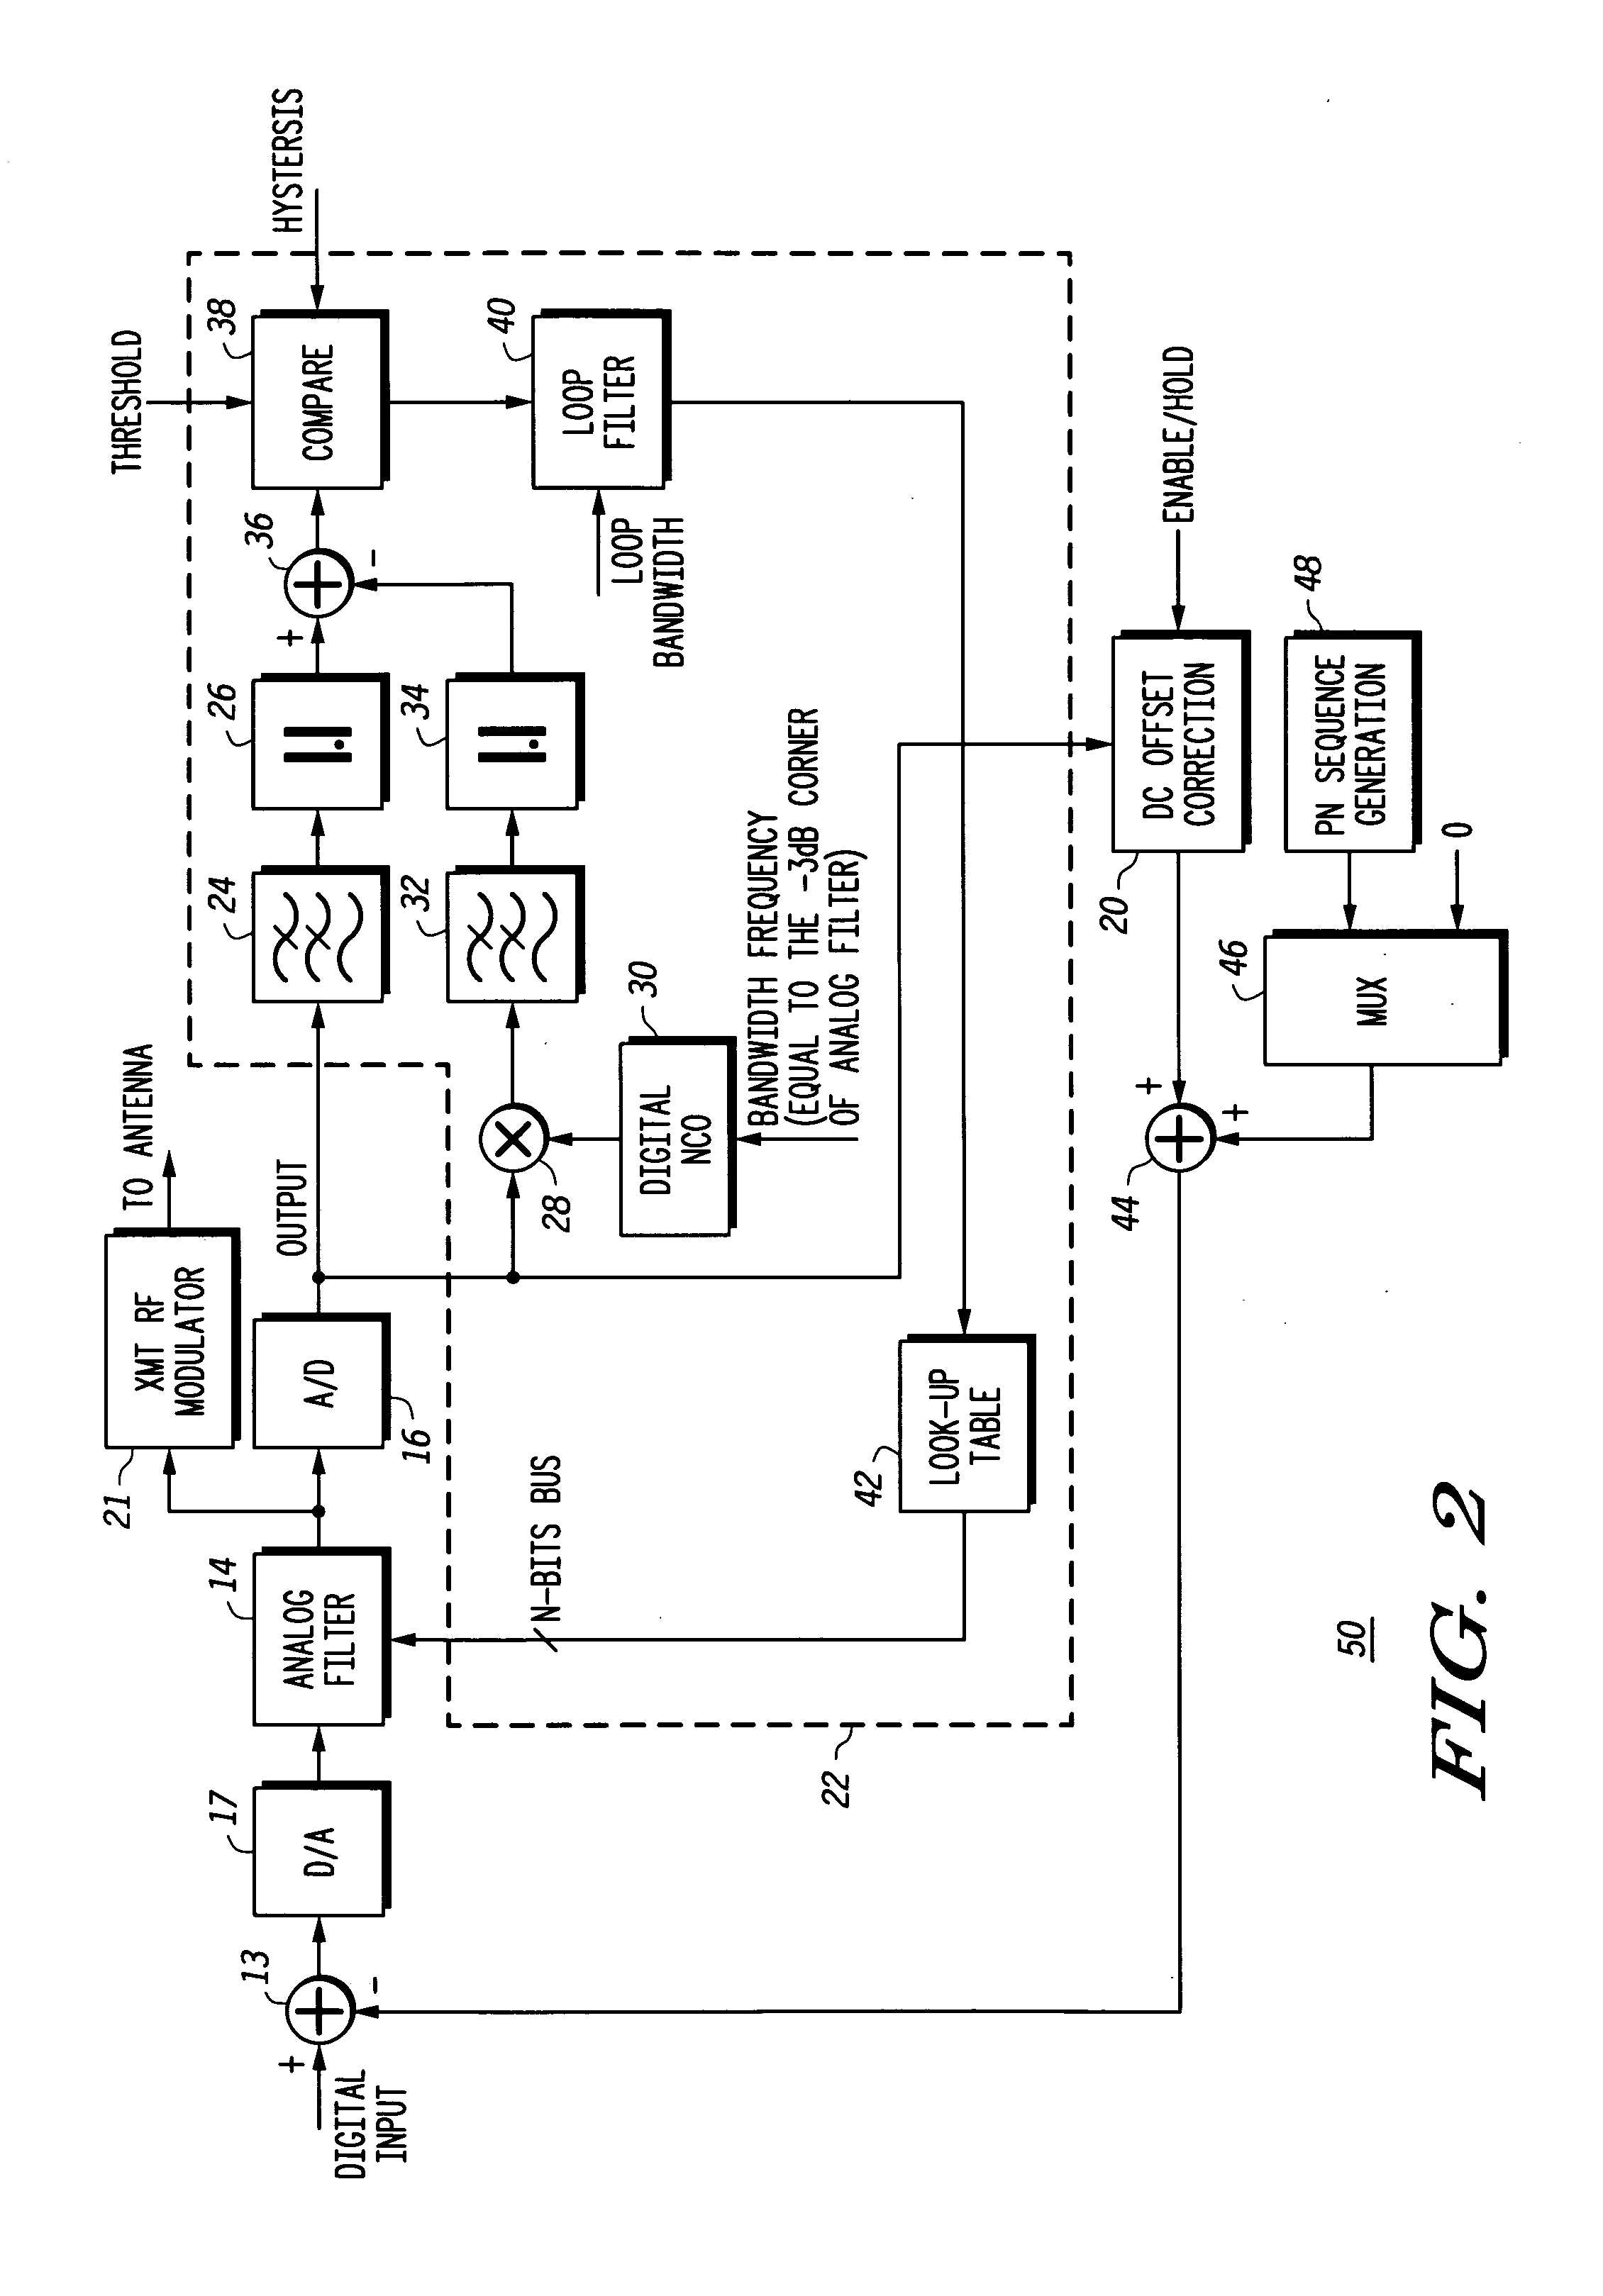 Method and apparatus for controlling the bandwidth frequency of an analog filter